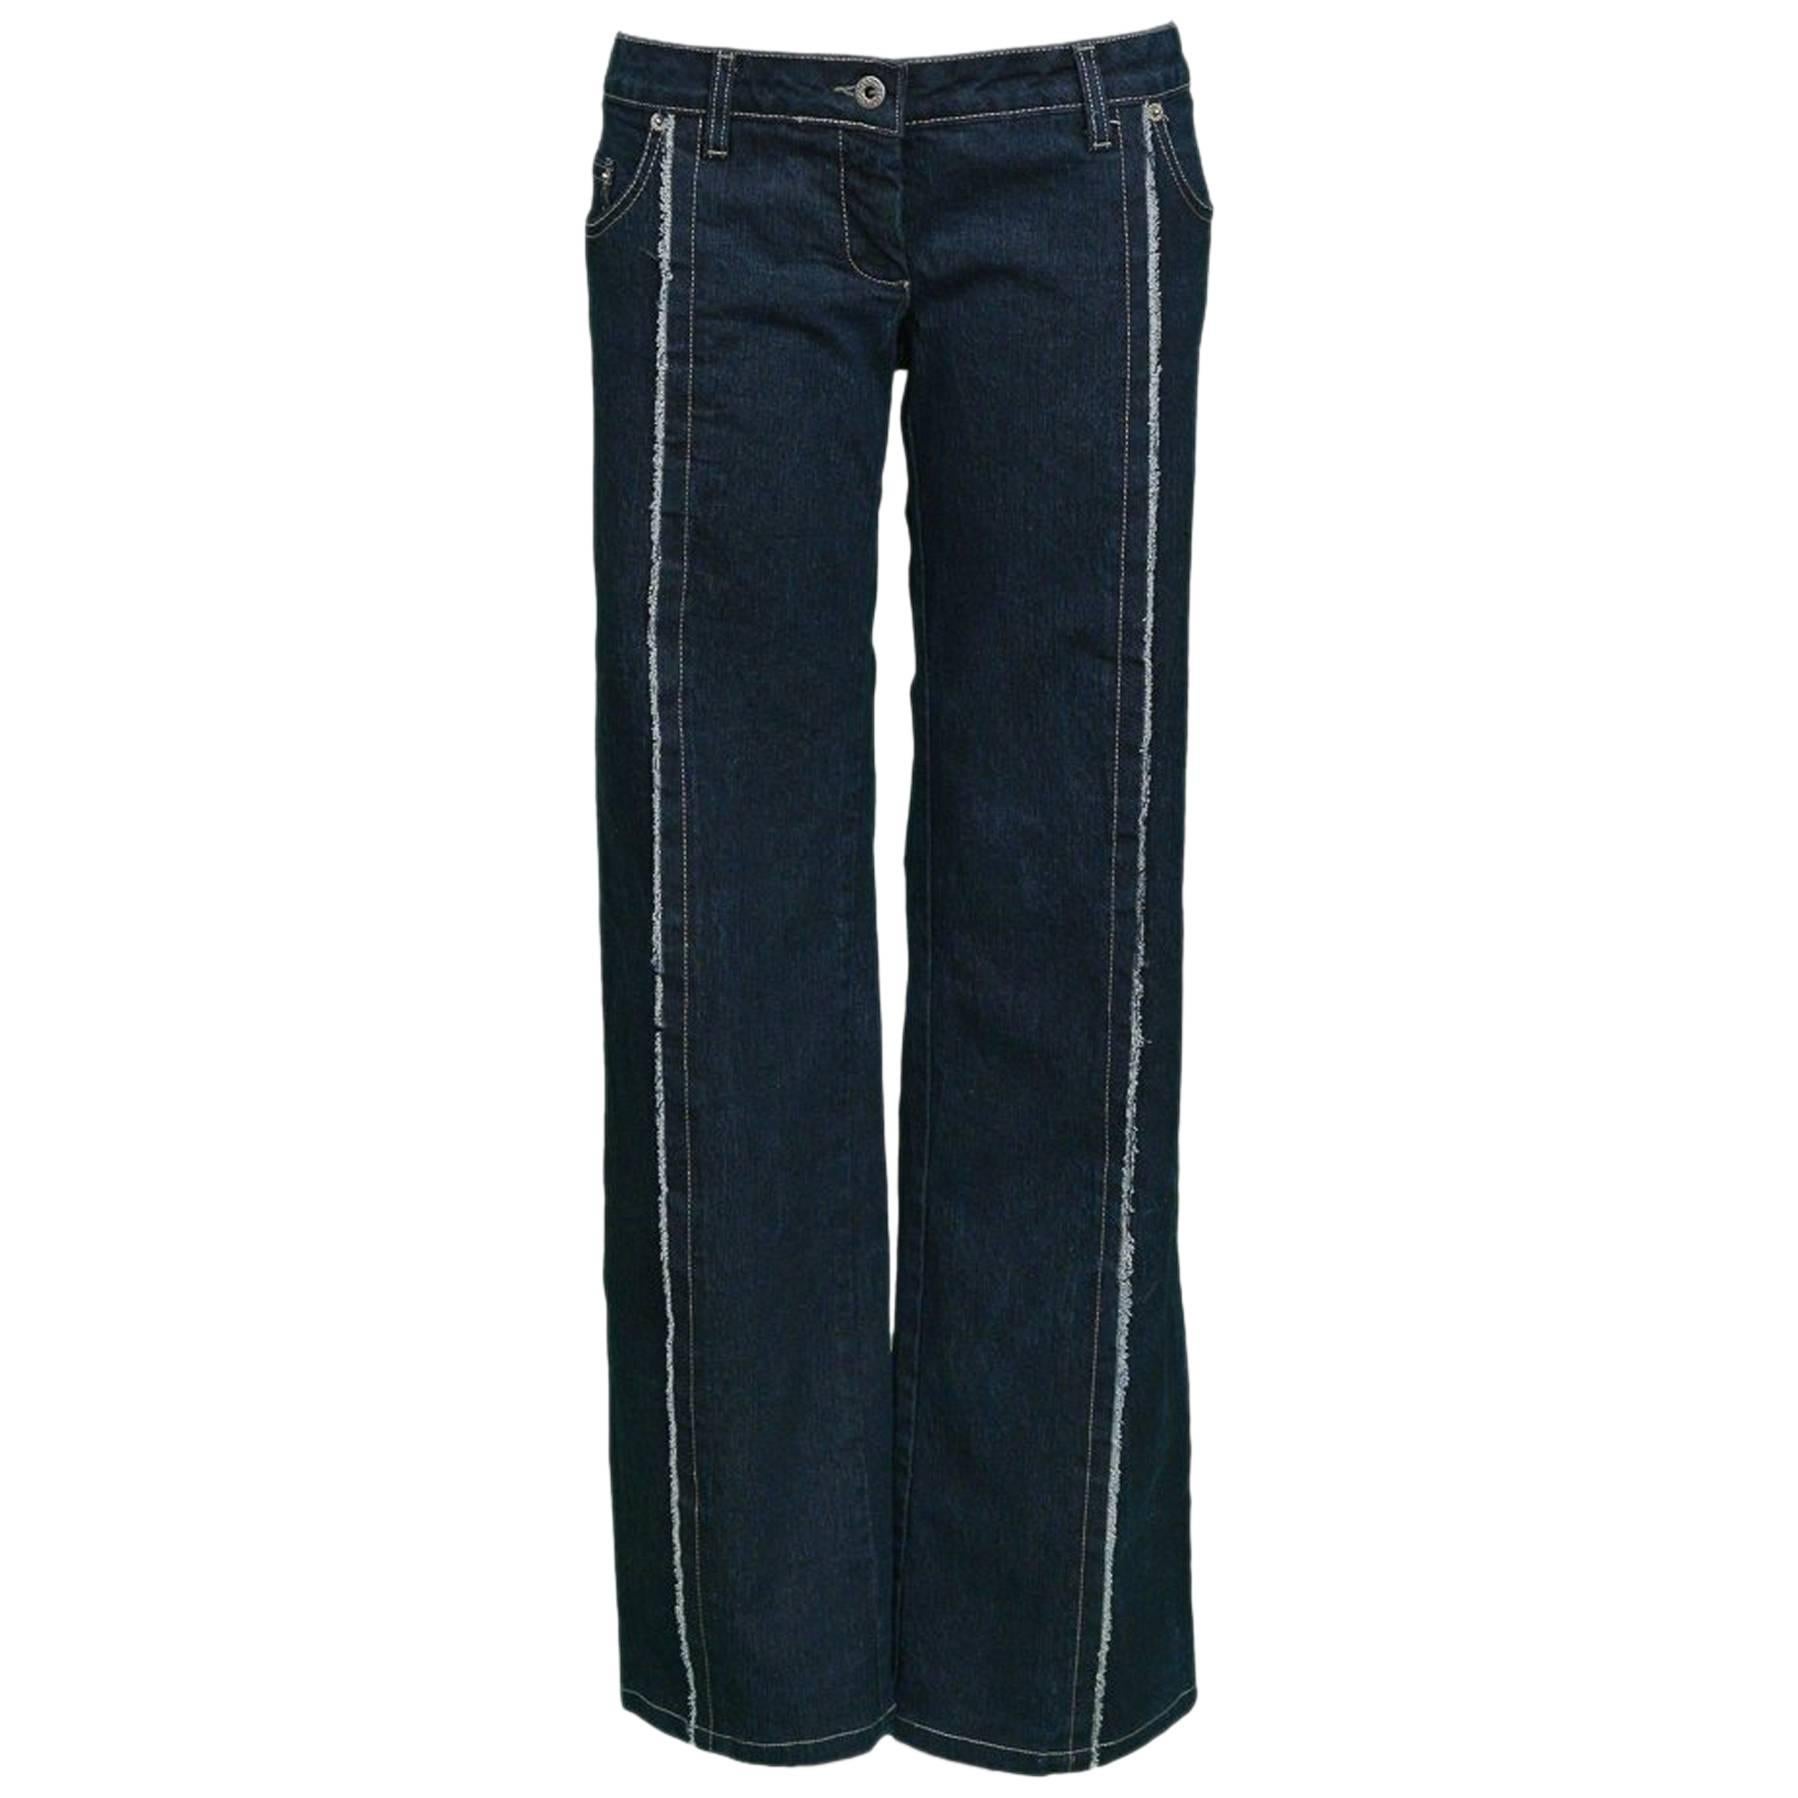 Legendary Alexander McQueen Iconic "Bumster" Lowest Rise Runway Jeans 1990's